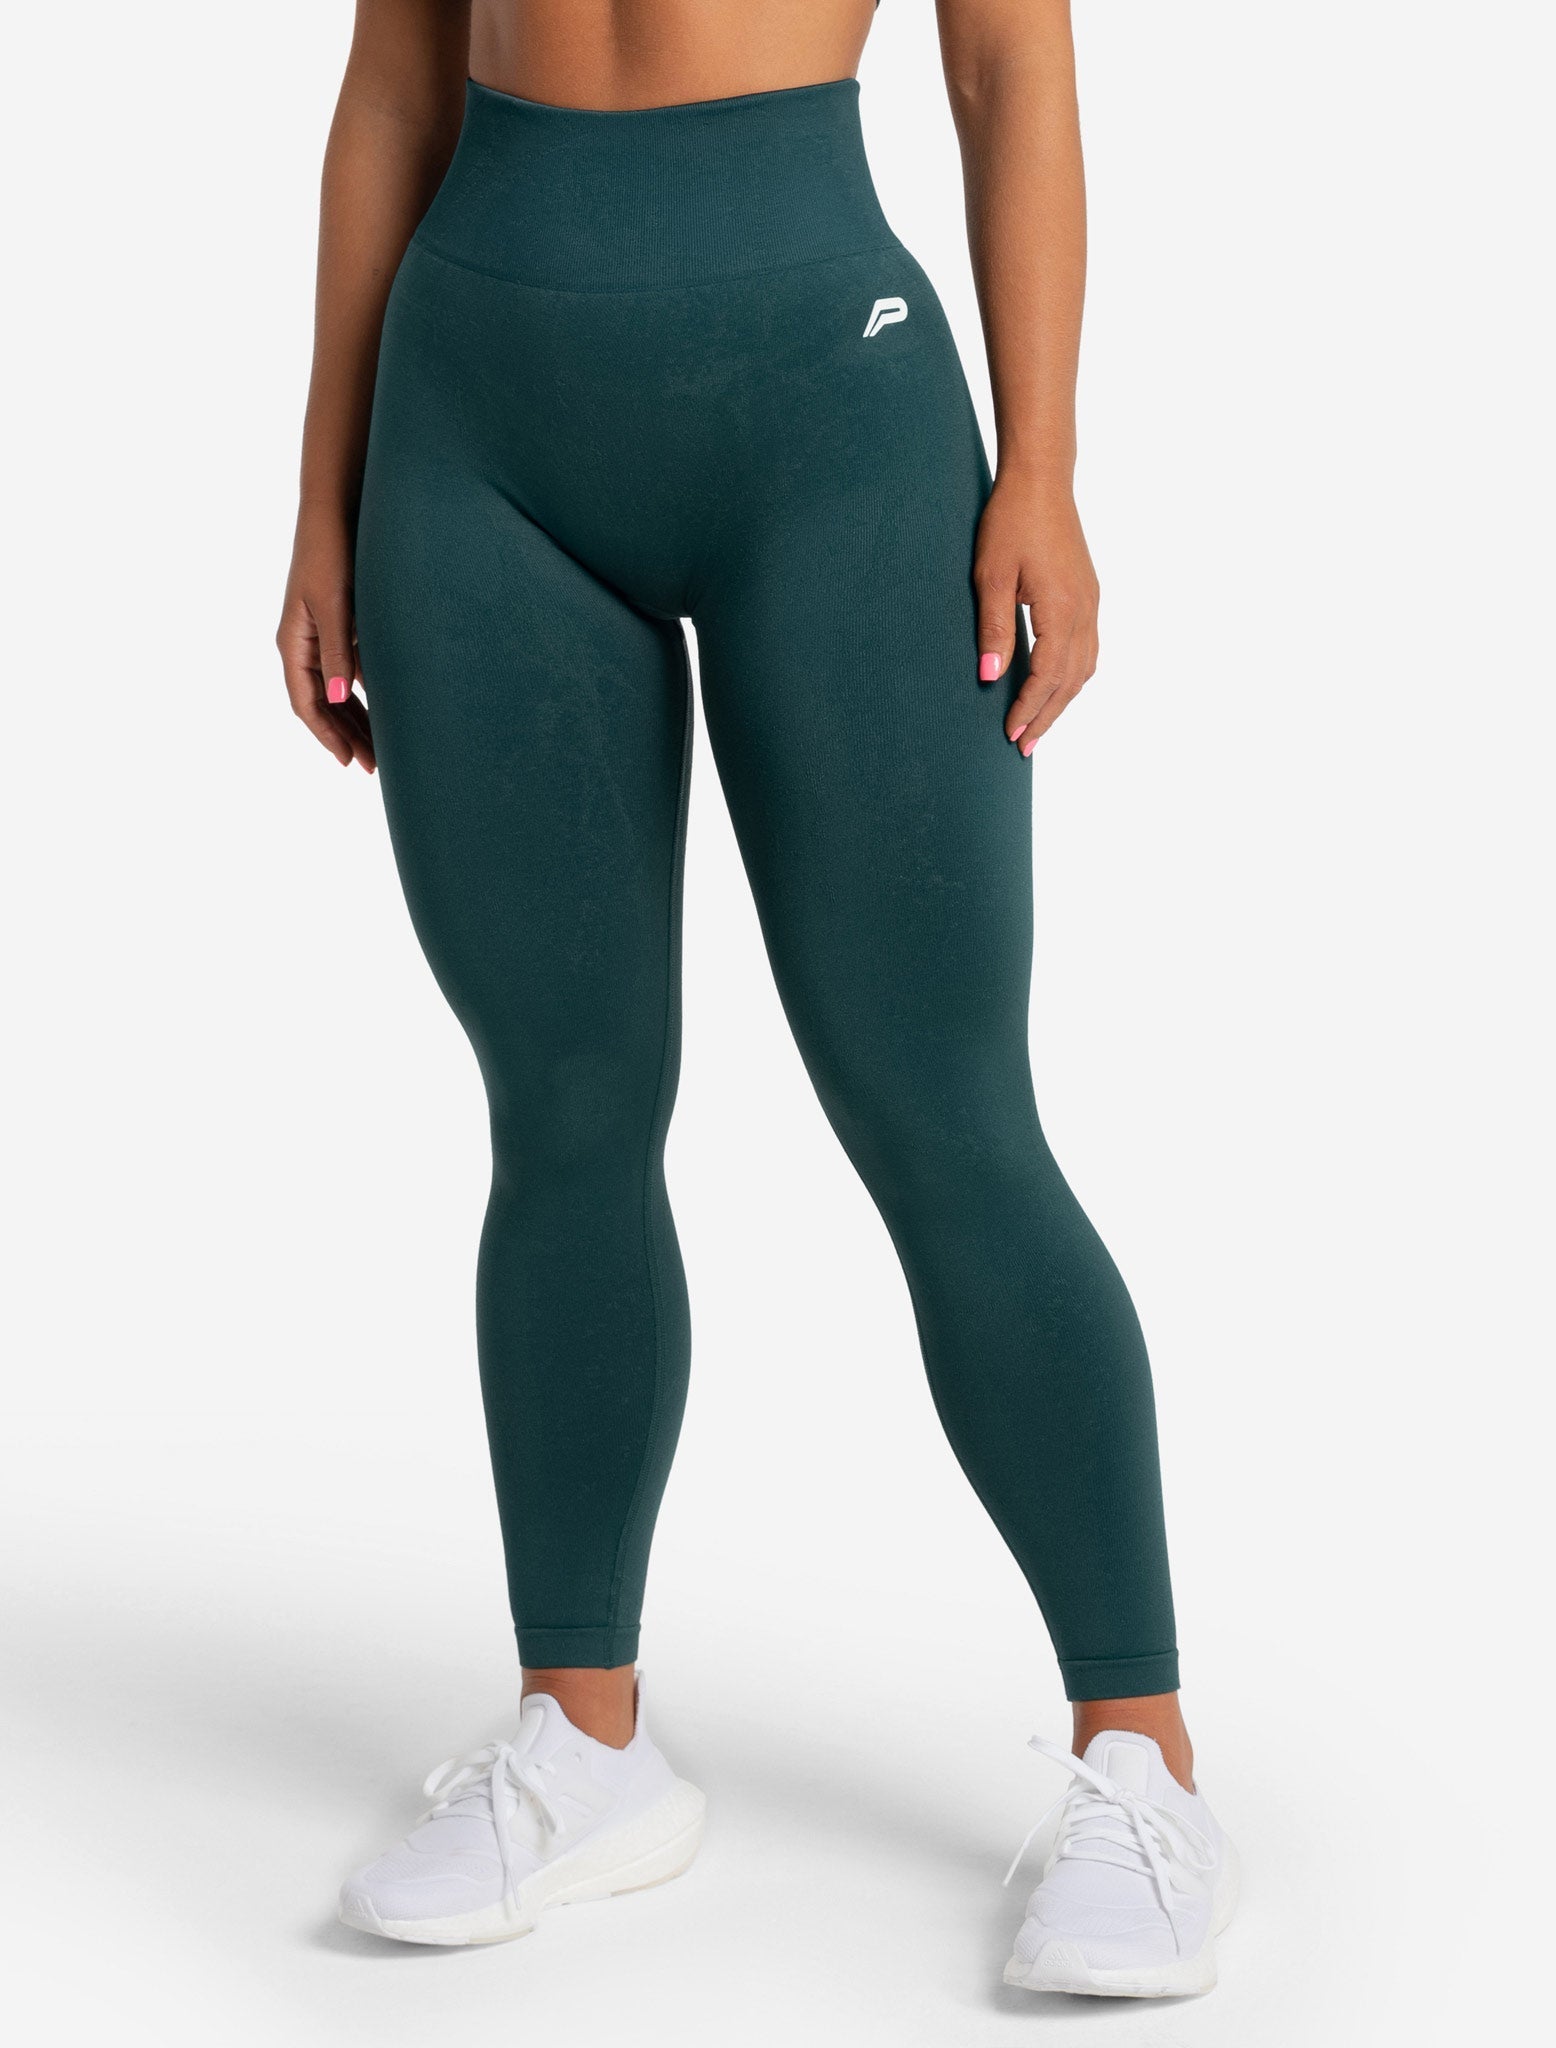 USA Pro, Seamless Ribbed Leggings, Forest Green